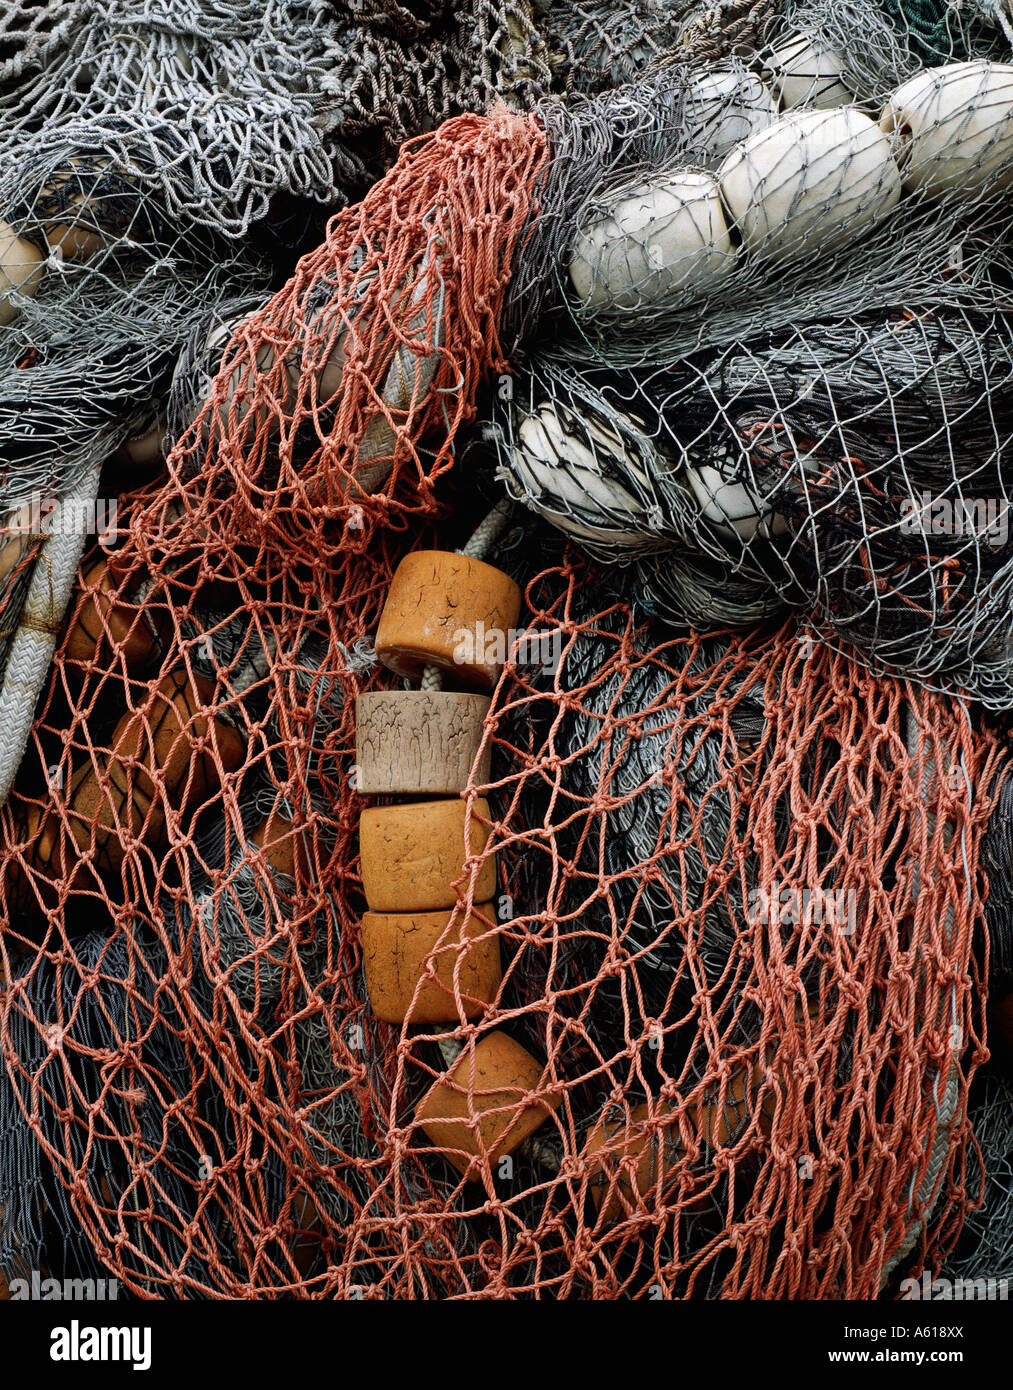 Commercial fishing nets and cork floats Stock Photo - Alamy